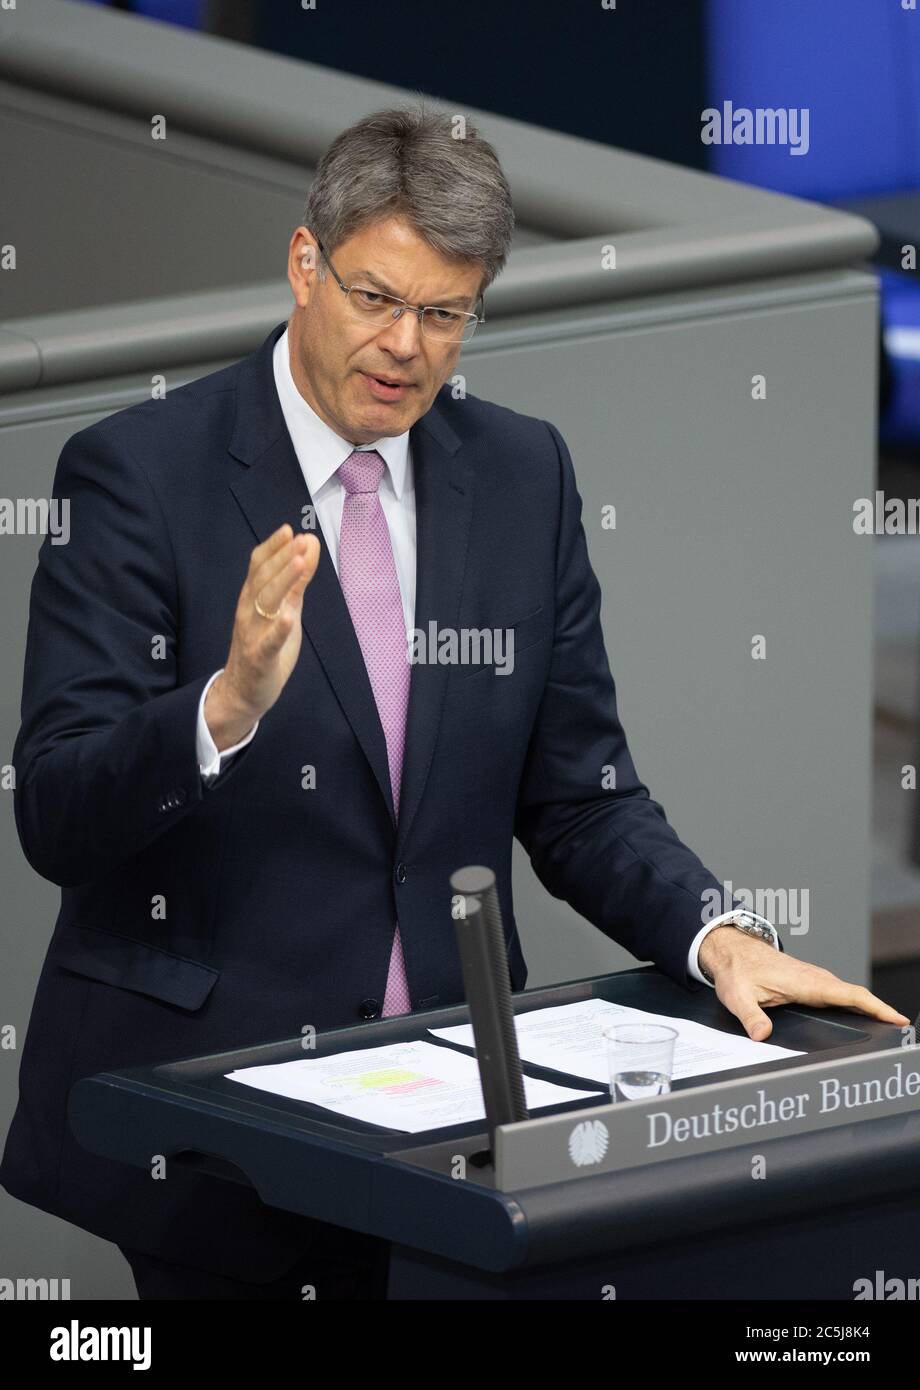 Berlin, Germany. 03rd July, 2020. Patrick Schnieder (CDU) speaks in the plenary session of the German Bundestag. The main topics of the 171st session of the 19th legislative period are the adoption of the Coal Exit Act, a topical hour on the excesses of violence in Stuttgart, as well as debates on electoral law reform, the protection of electronic patient data, the welfare of farm animals and the German chairmanship of the UN Security Council. Credit: Christophe Gateau/dpa/Alamy Live News Stock Photo